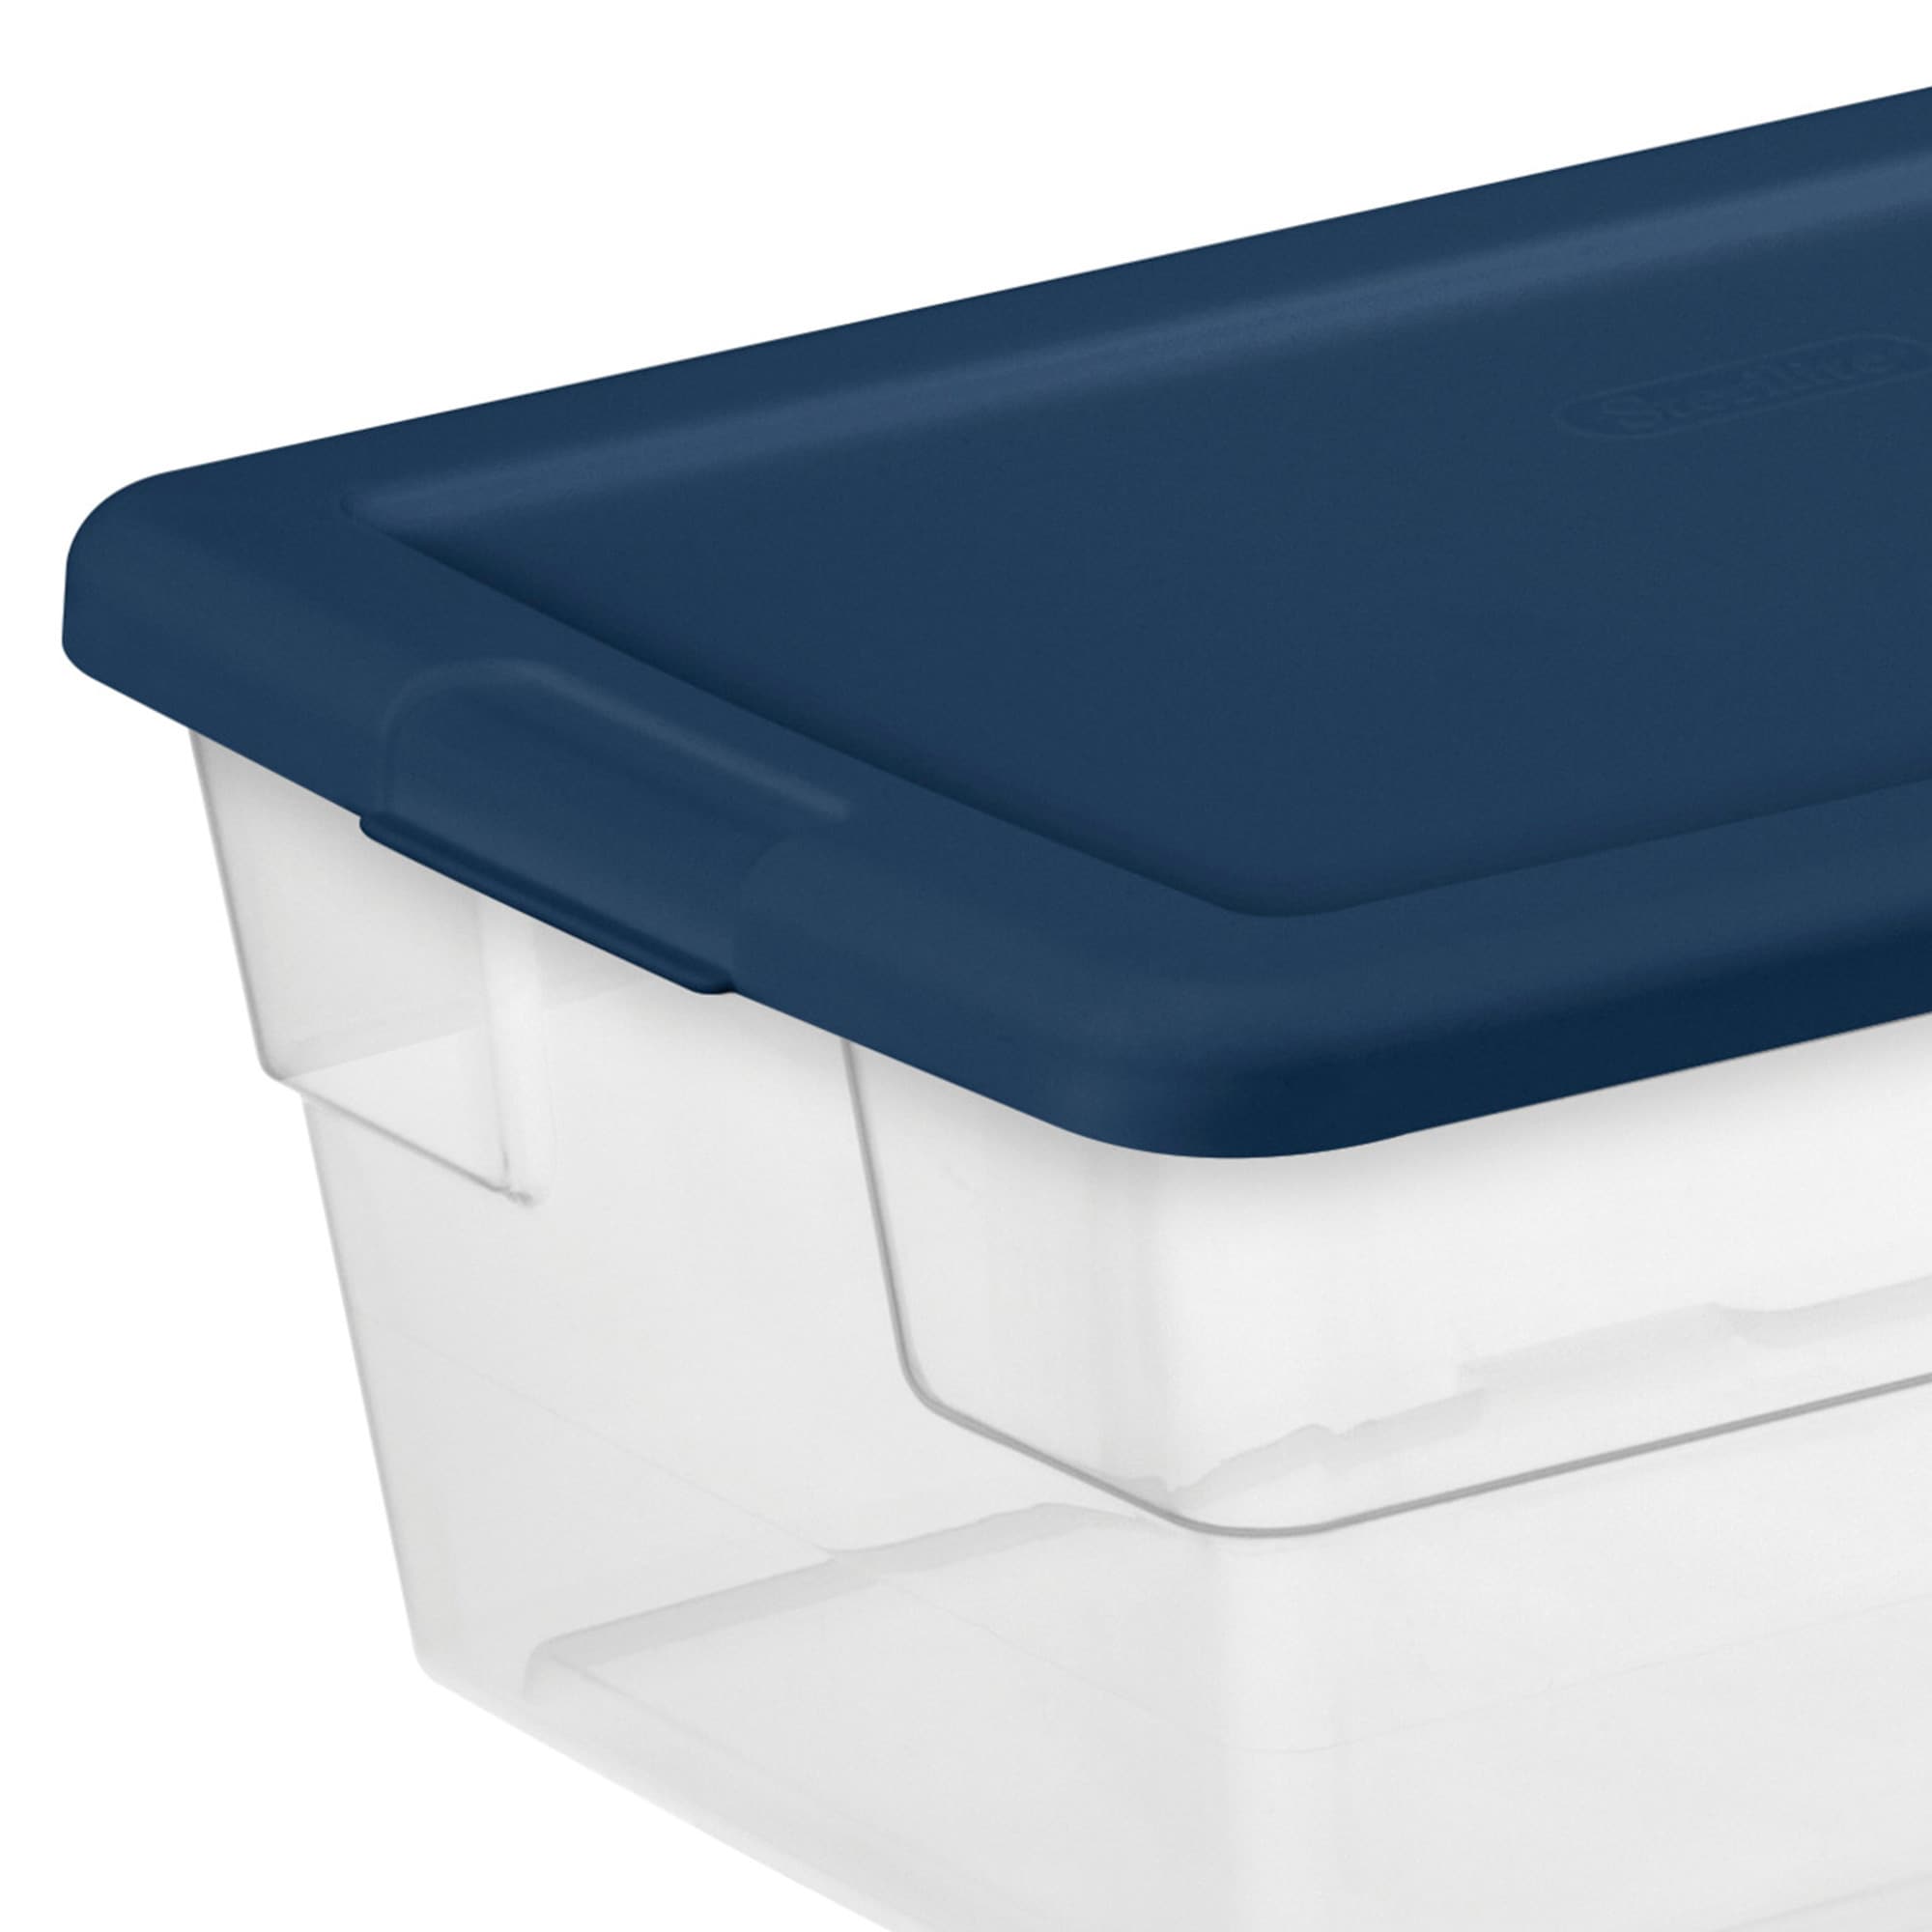 Sterilite 16 qt. Stackable Storage Box Container with Marine Blue